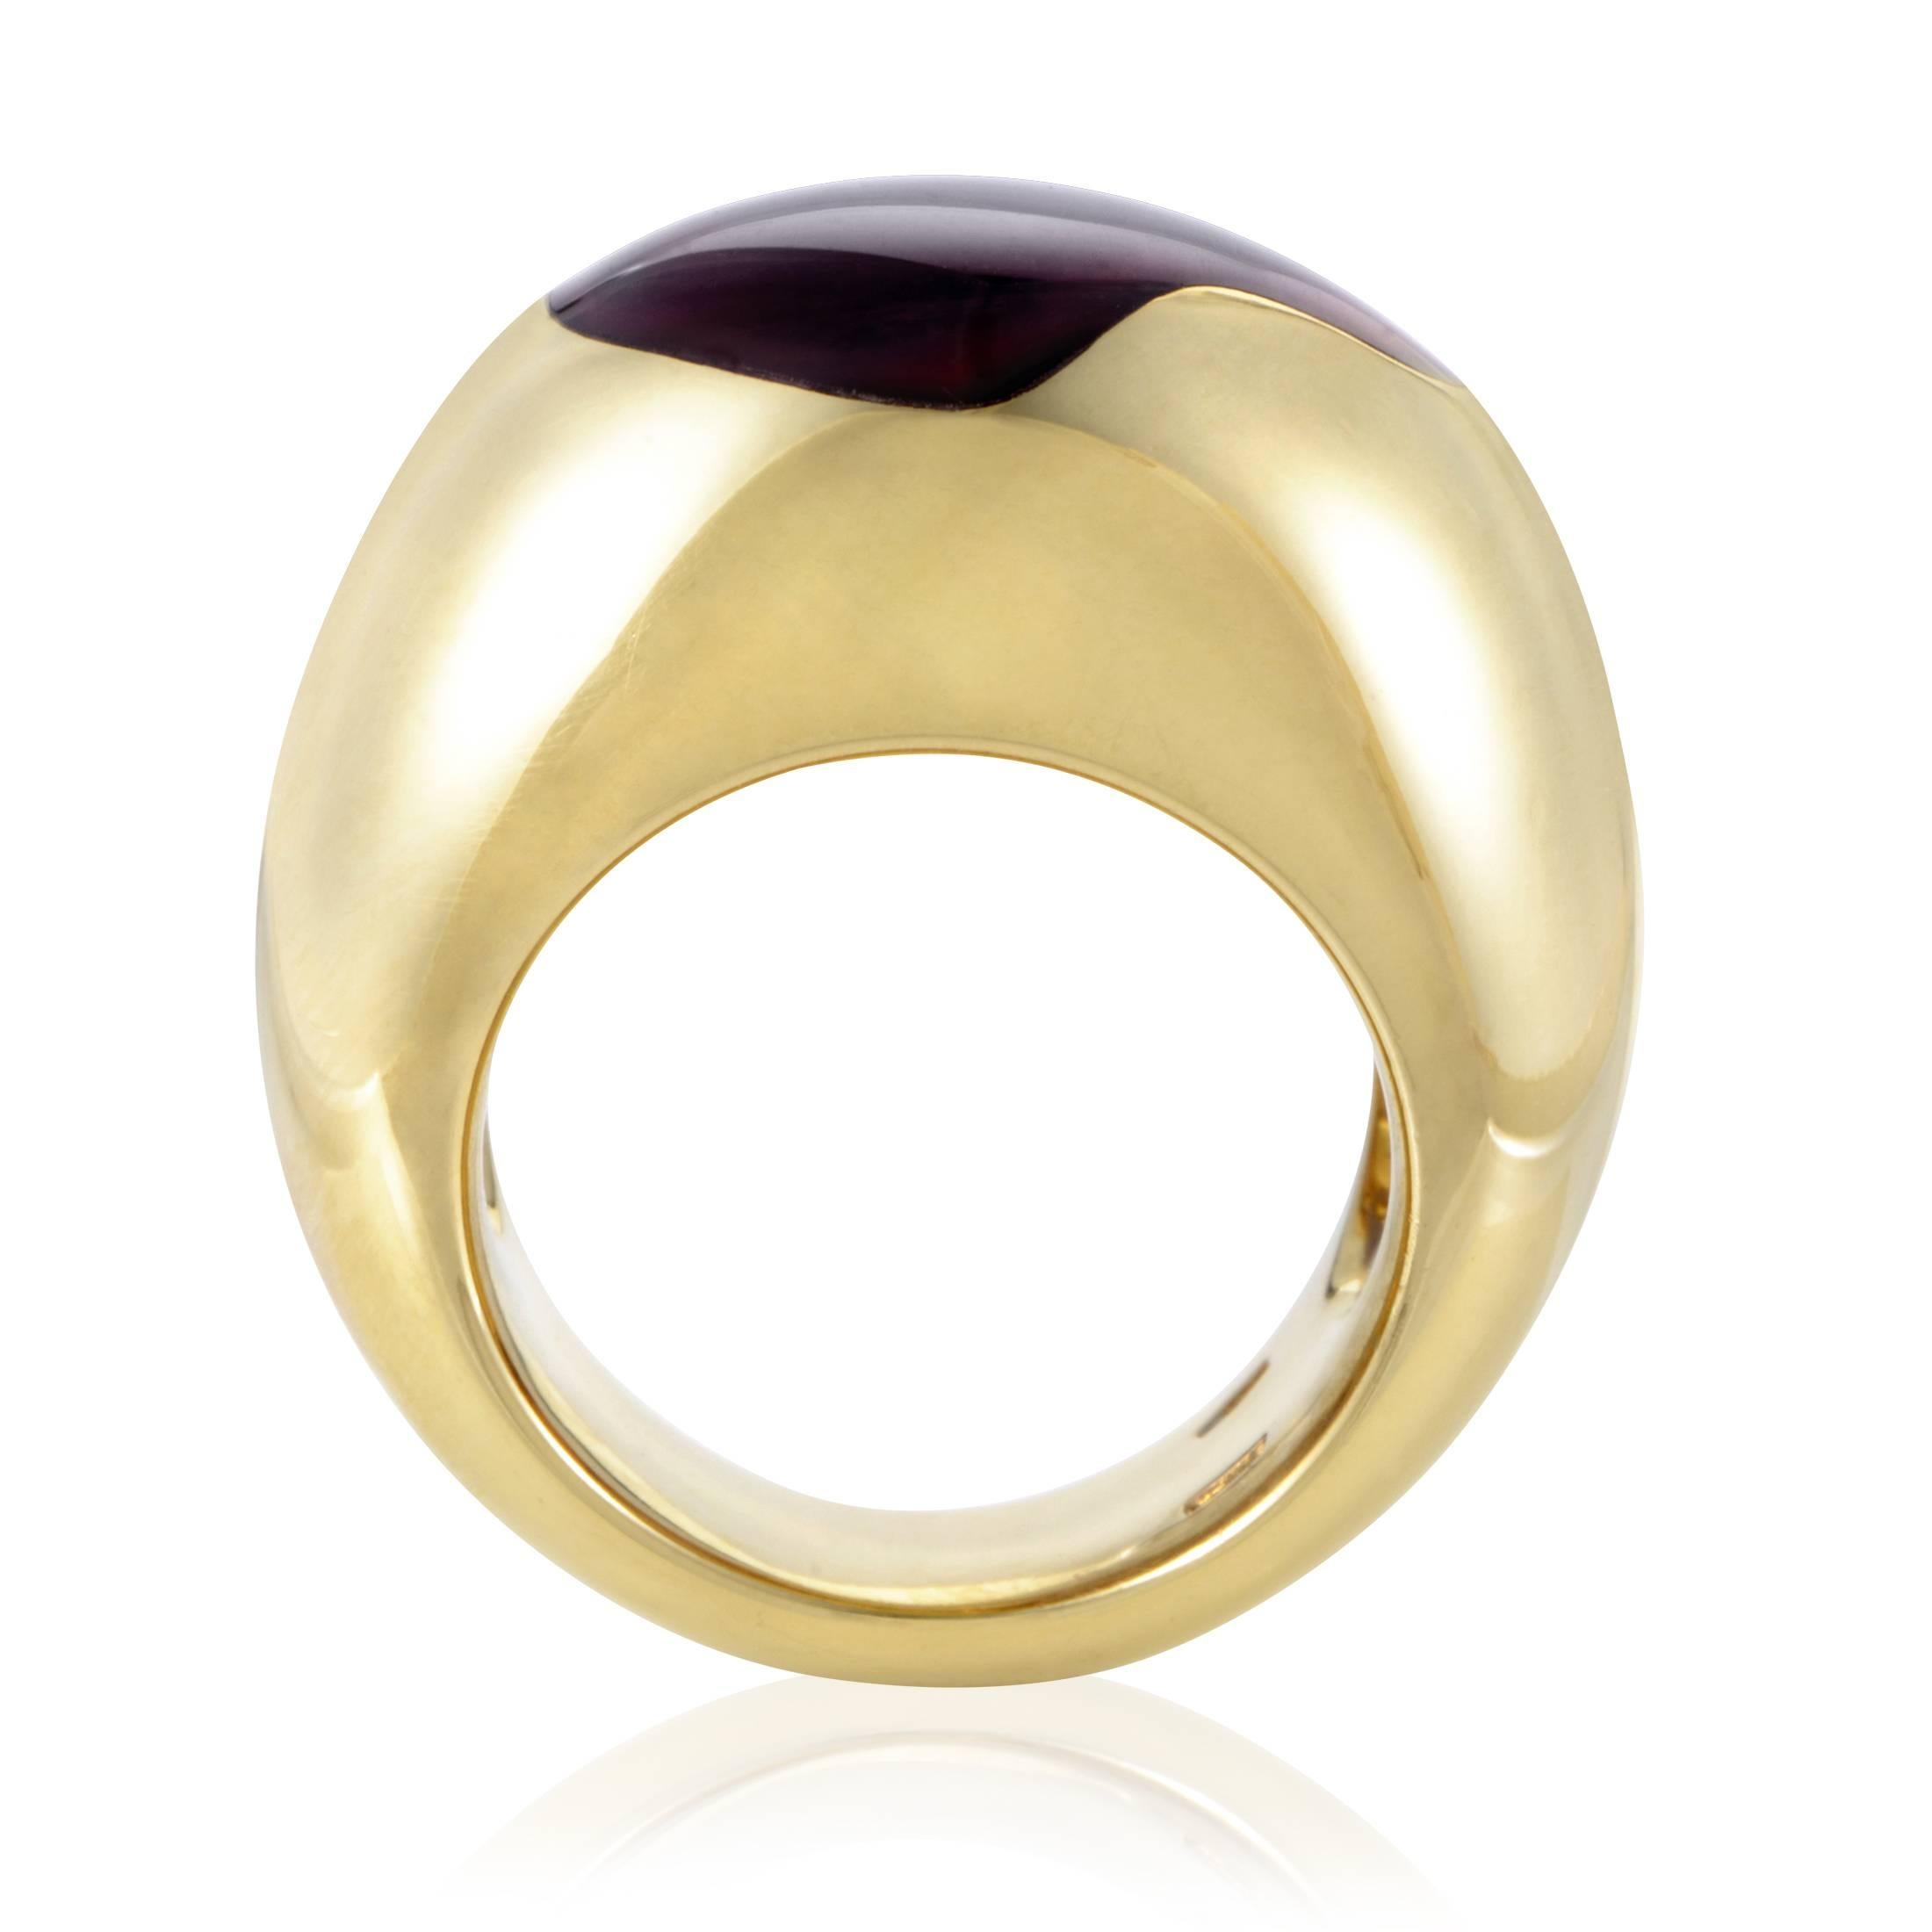 Perfectly in keeping with the elegantly smooth shape of the 18K yellow gold body, the fantastic garnet stone tastefully complements the luxurious golden gleam with its majestic color in this outstanding ring from Pomellato.
Ring Size: 6.5 (52